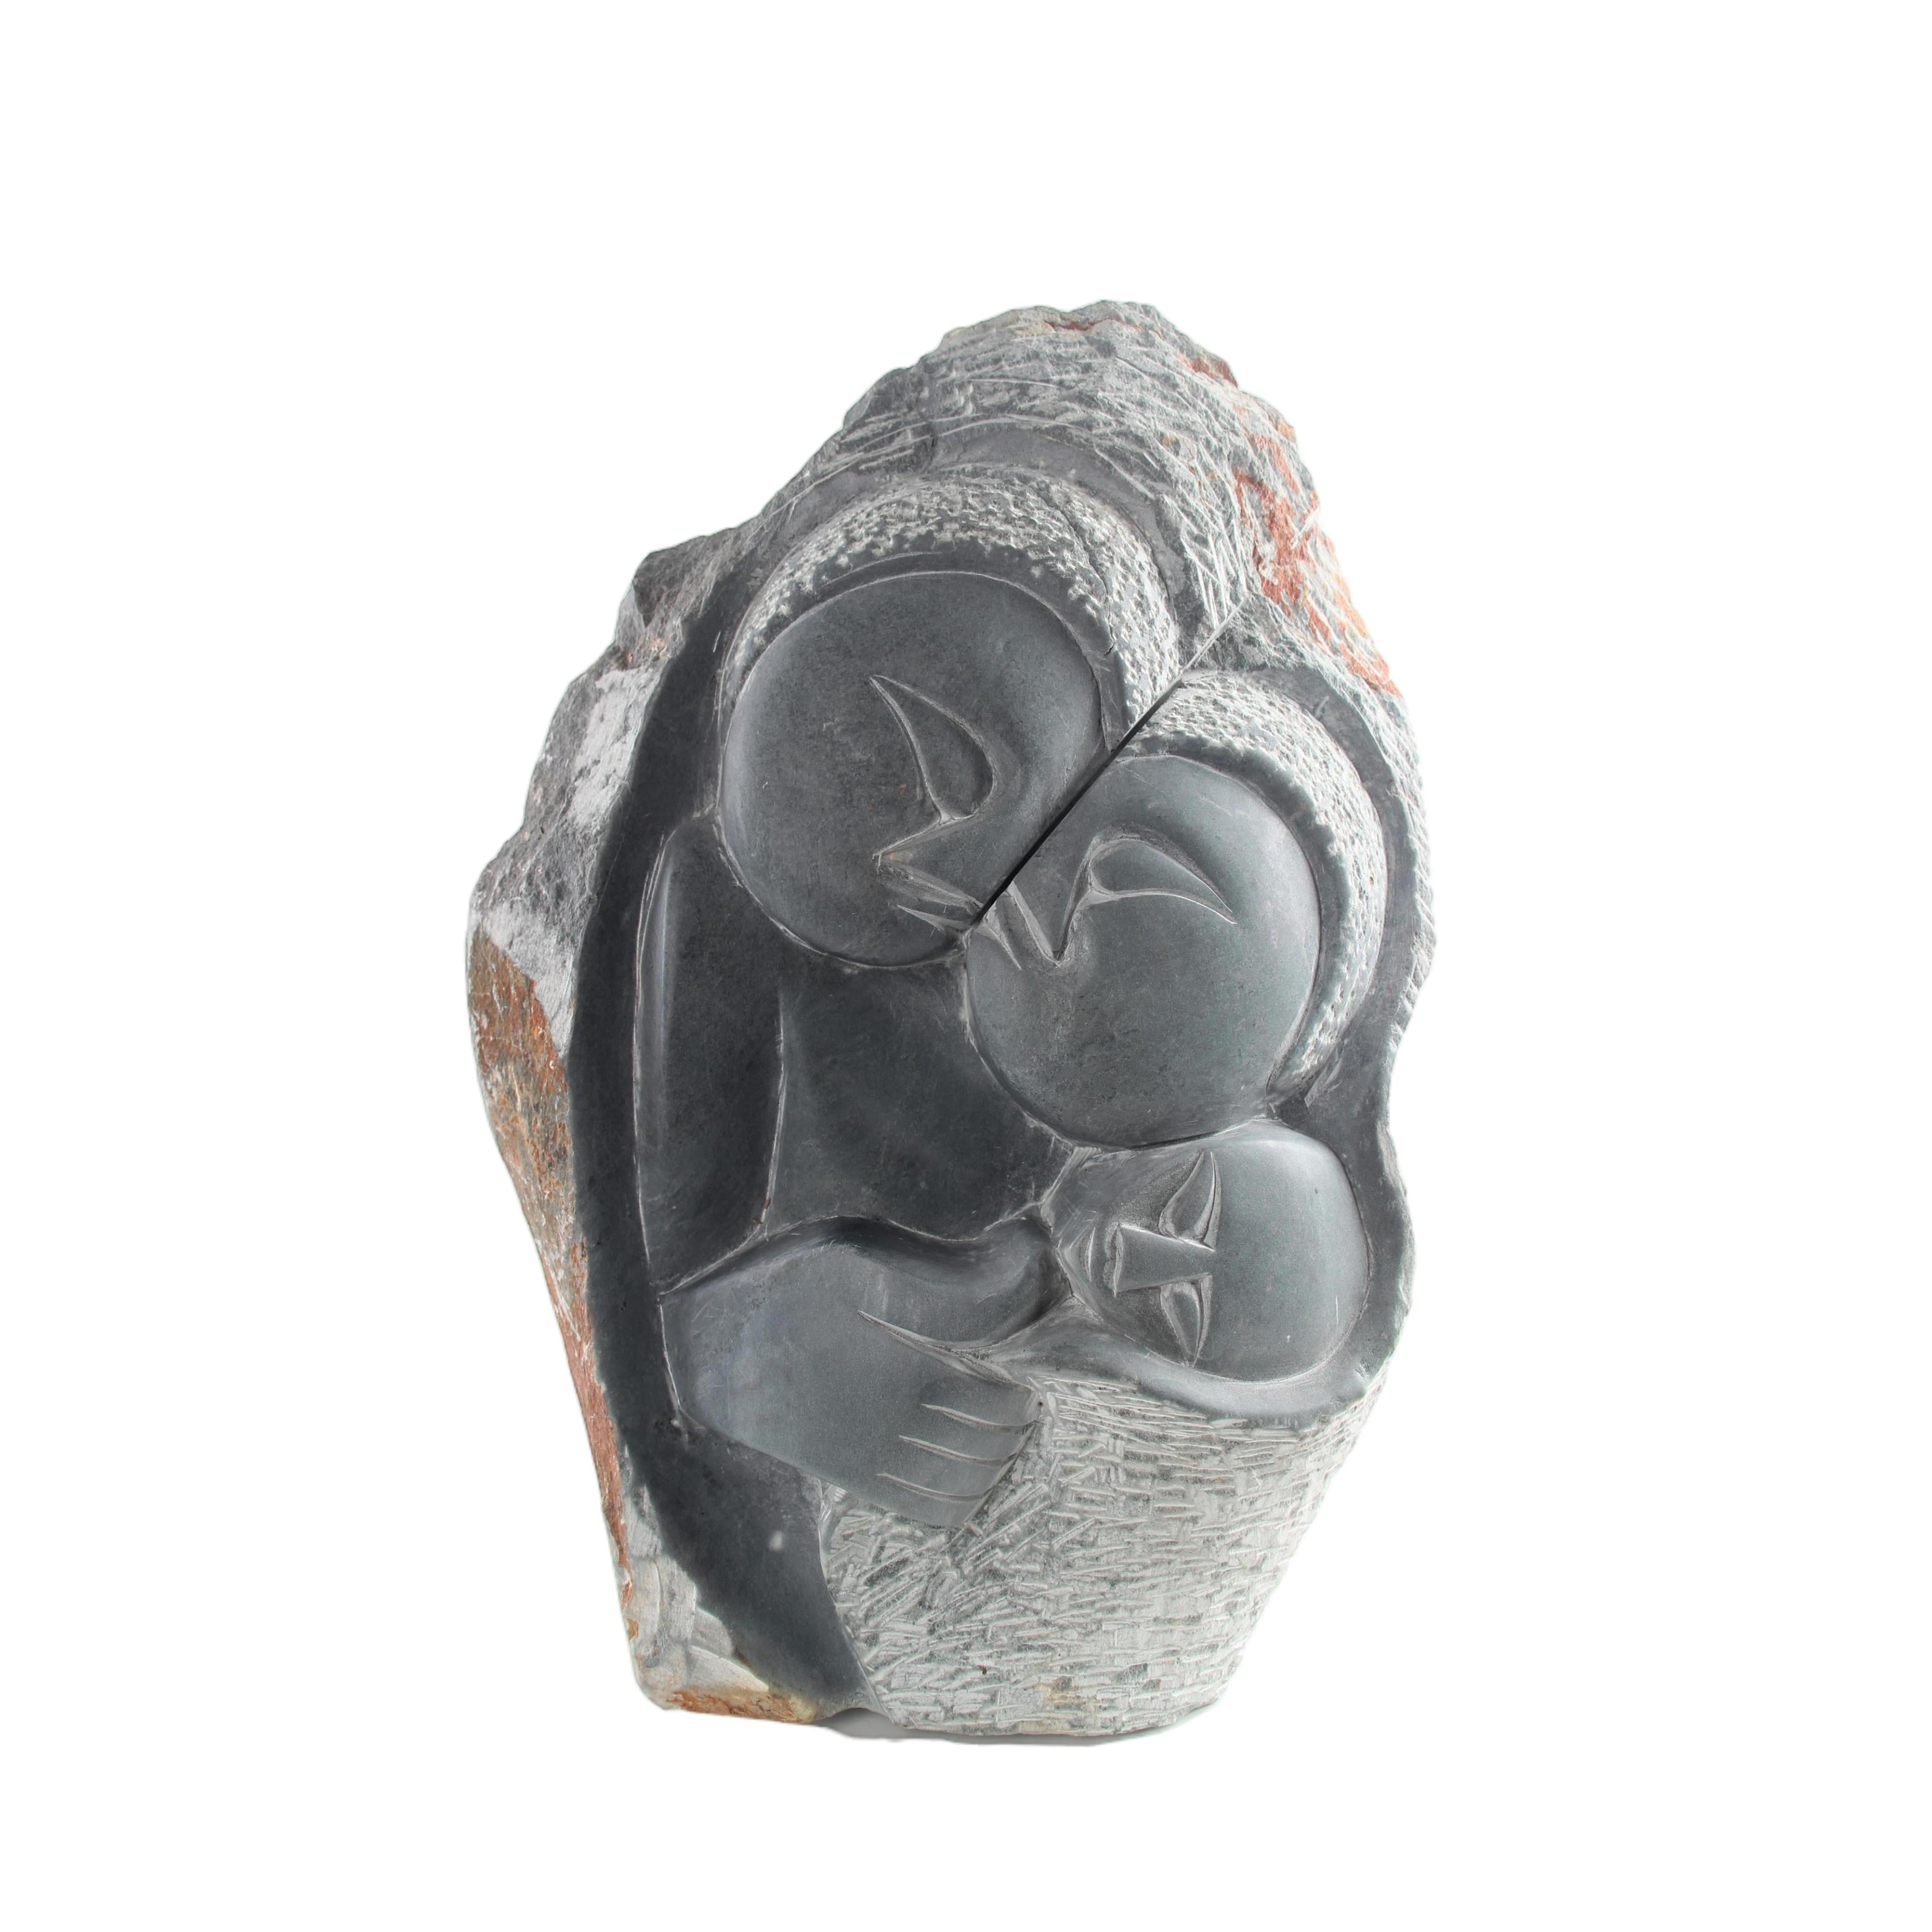 Shona Tribe Serpentine Stone Mother and Children ~13.0" Tall